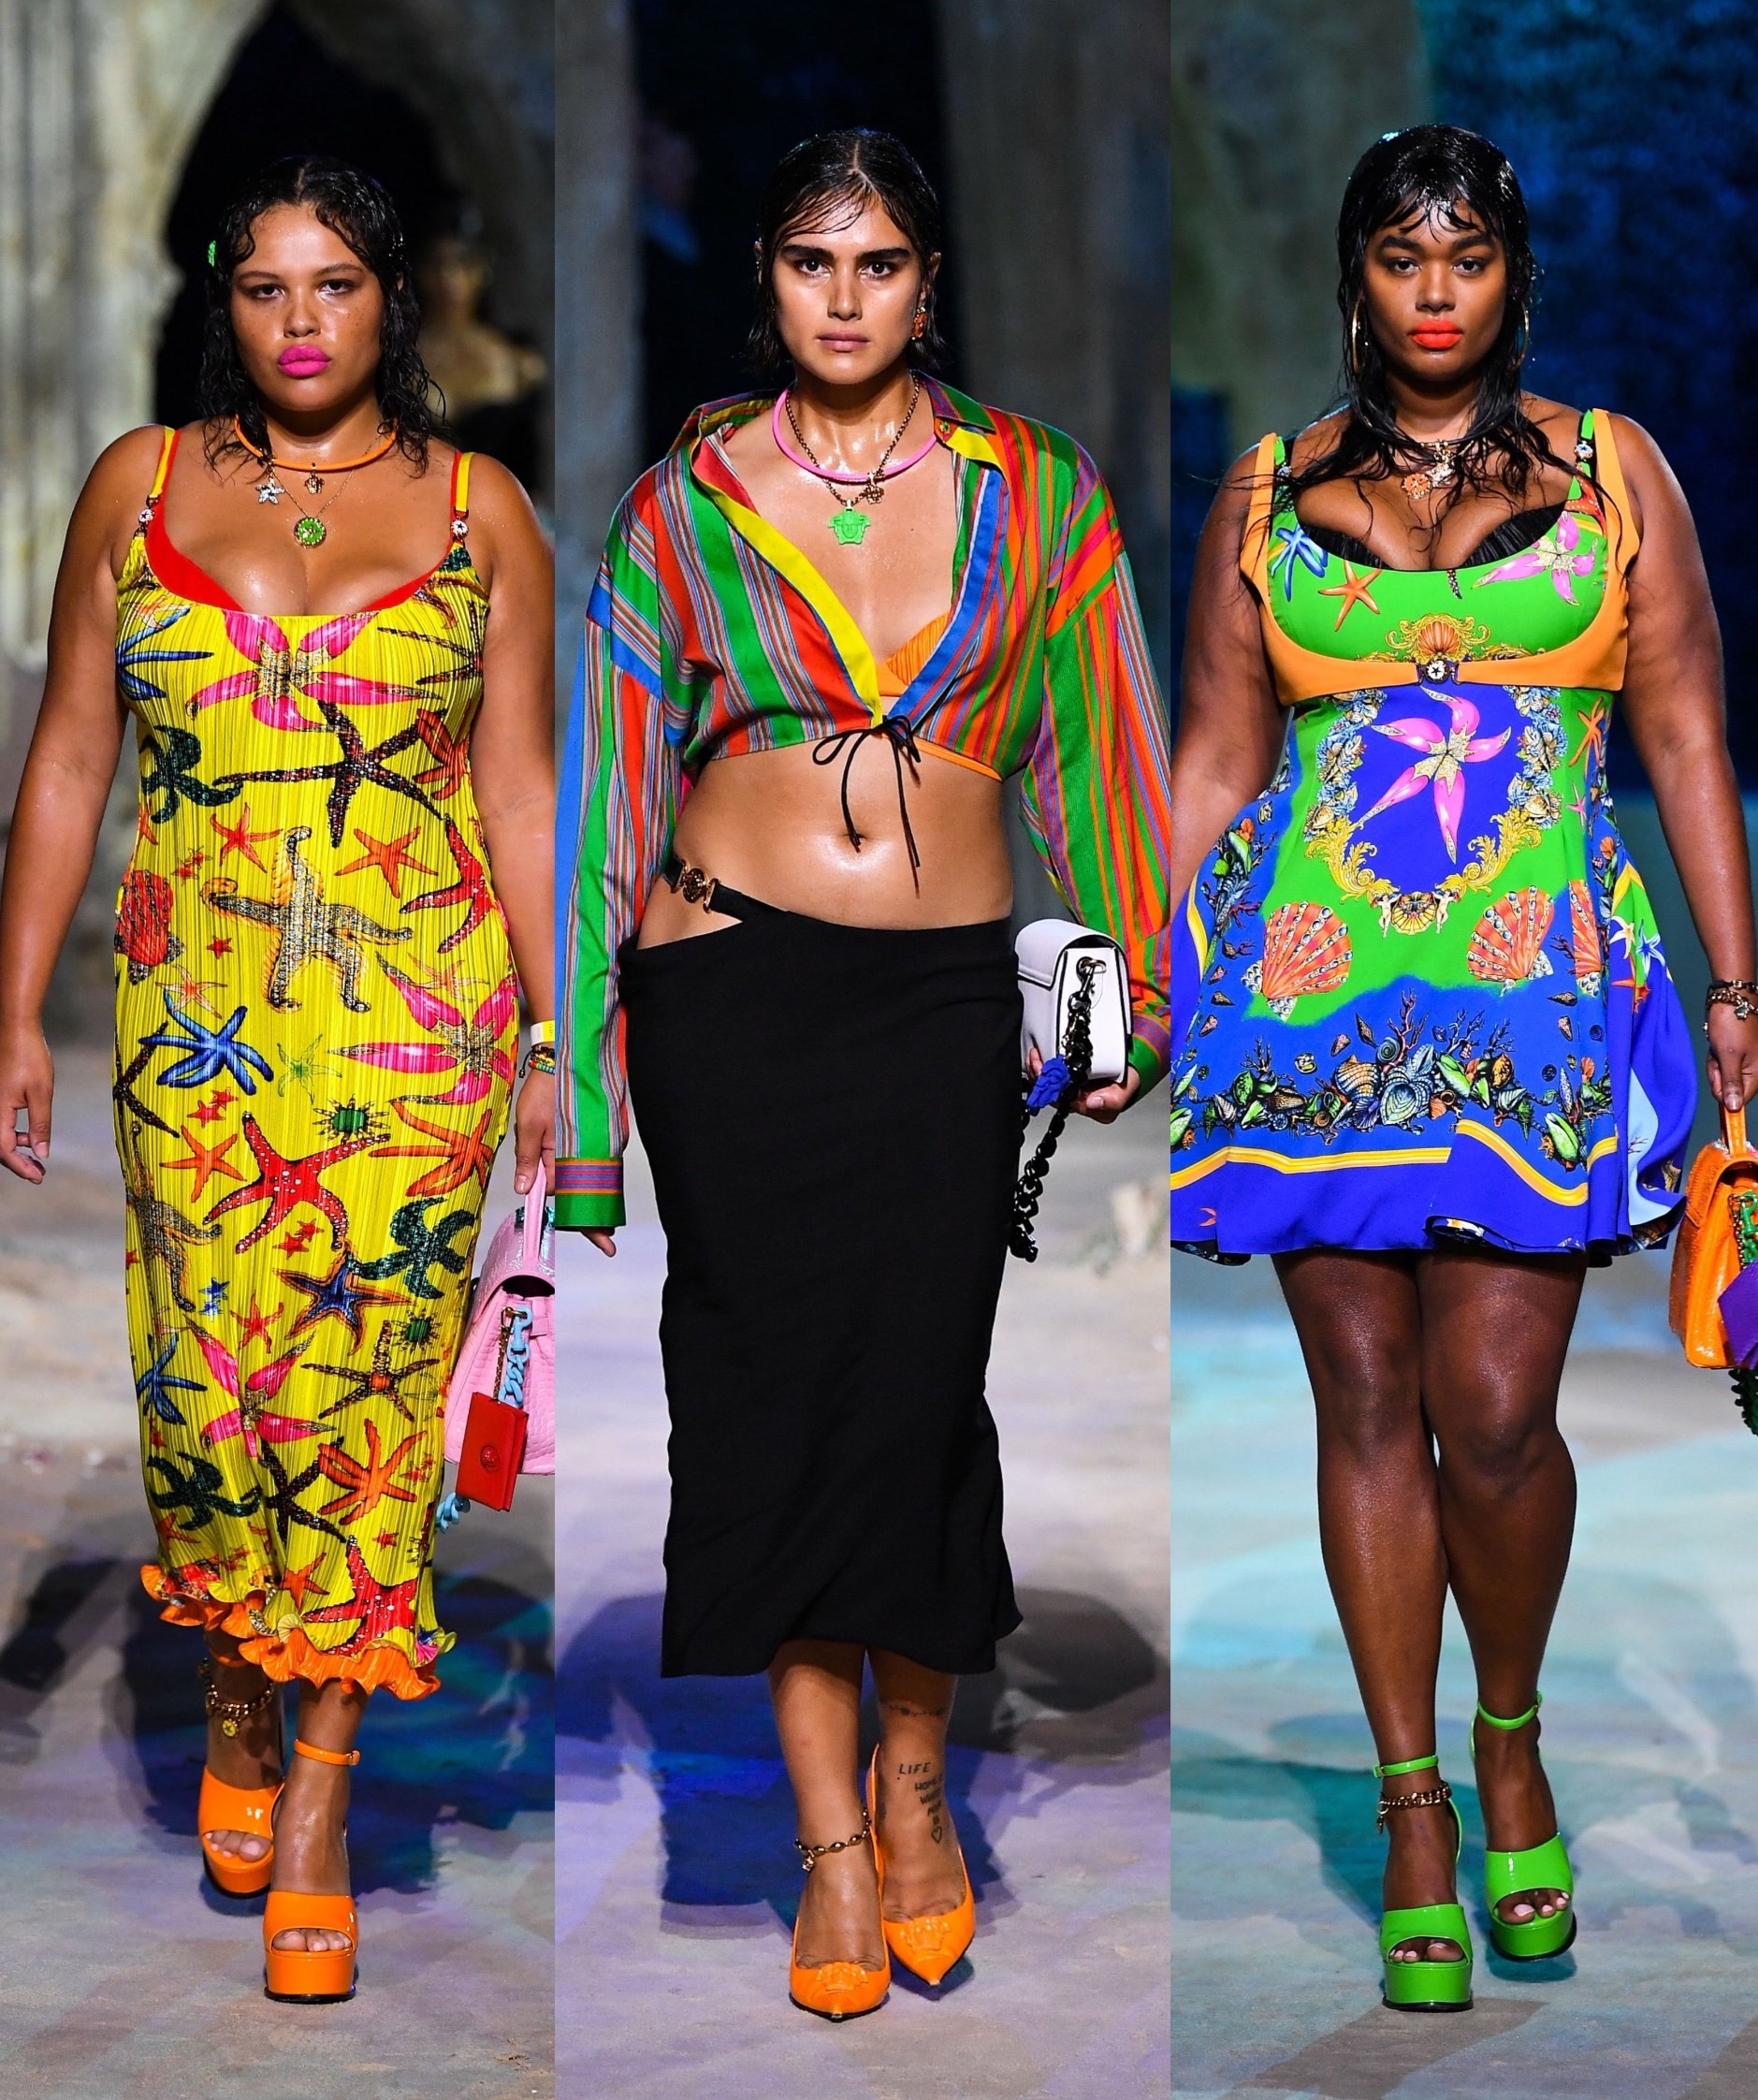 Plus-Size Models are demanded in Fashion! - go-models